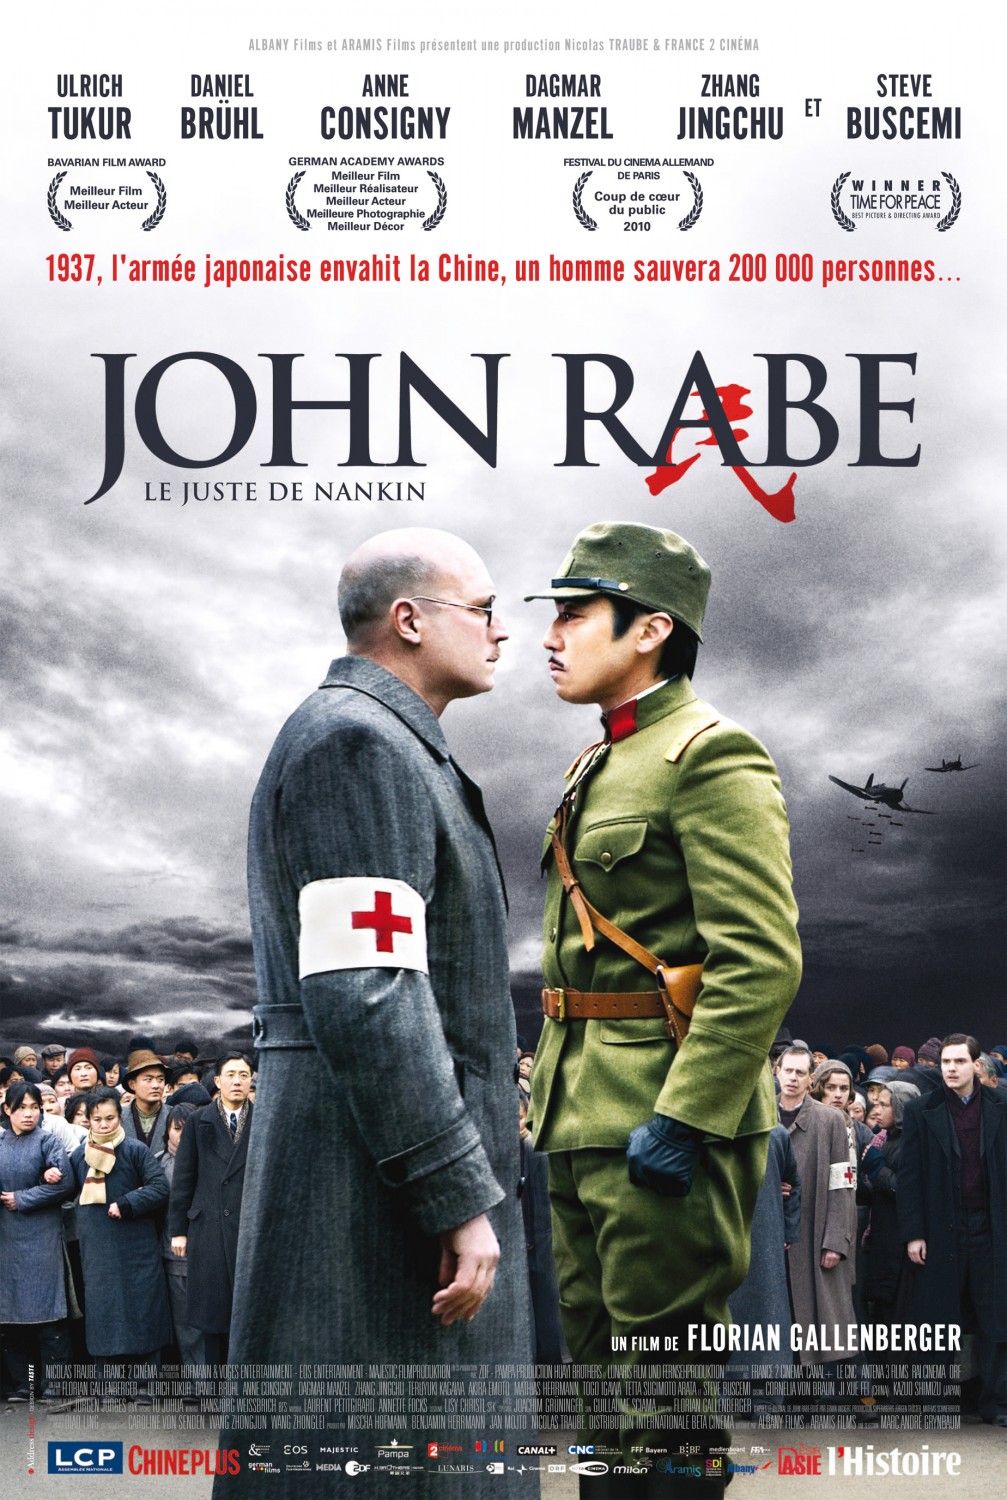 Extra Large Movie Poster Image for John Rabe (#4 of 5)